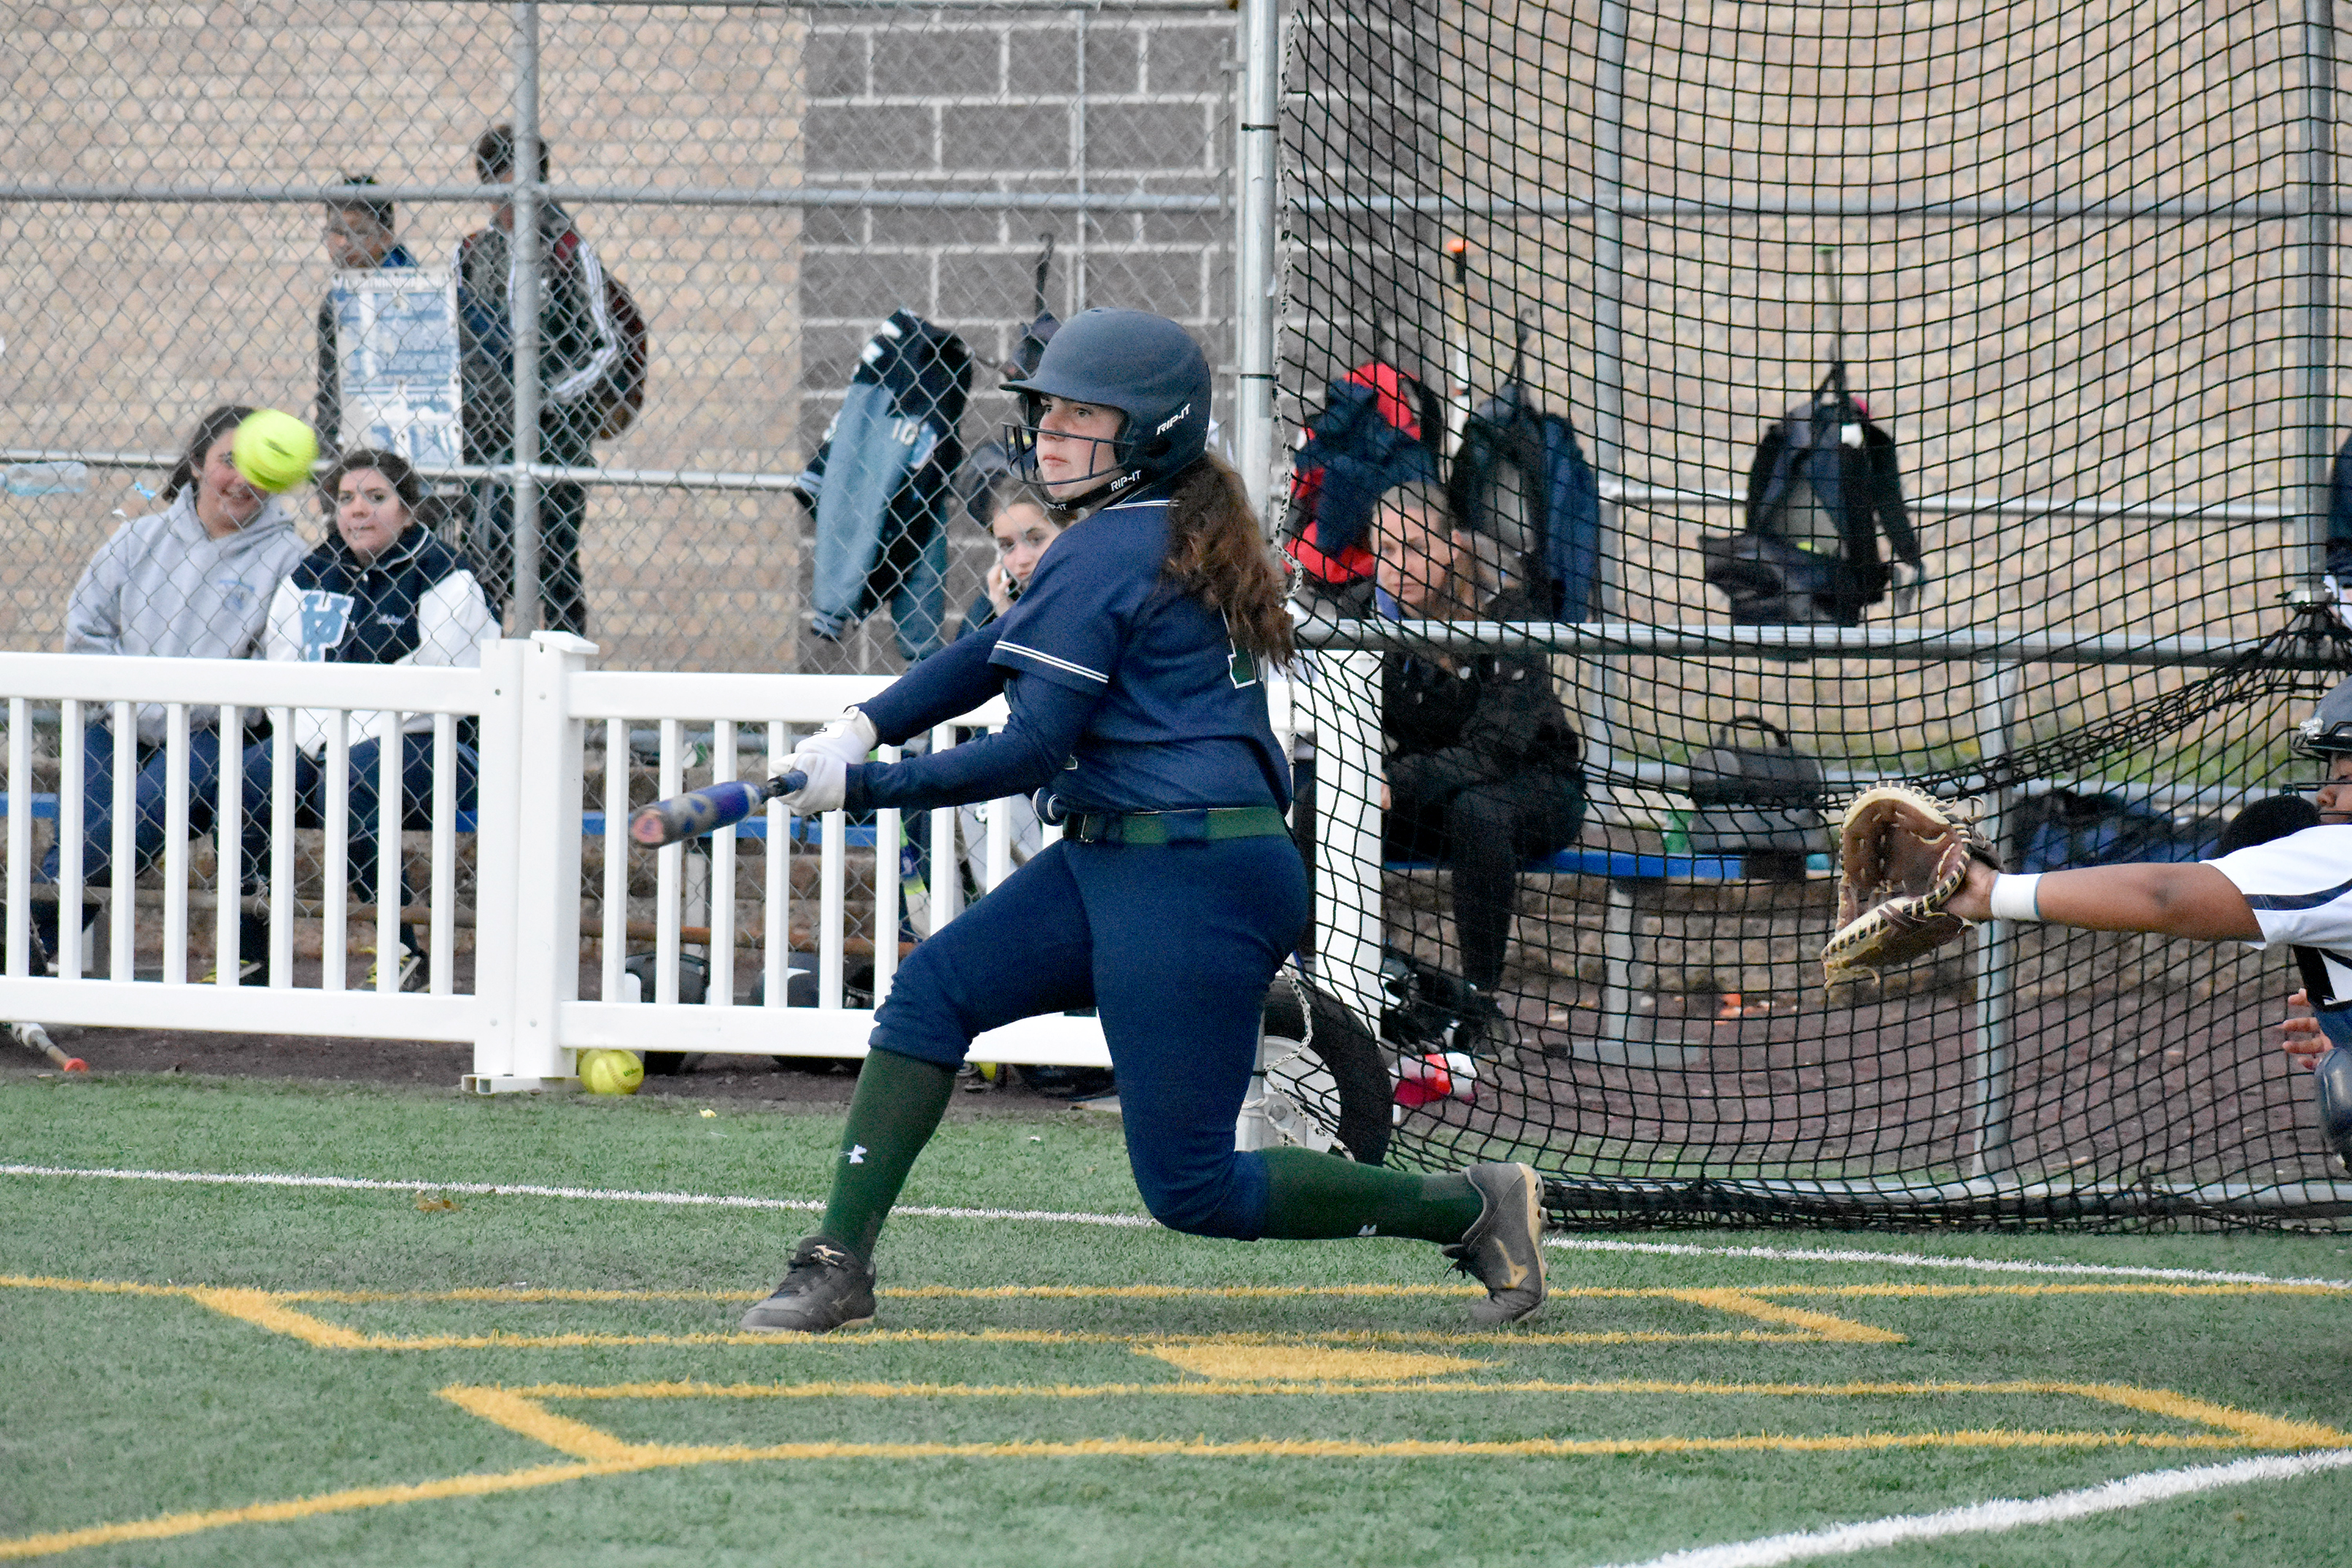 Softball: Turvey, Pacifico, produce game-winning surge for Cougars